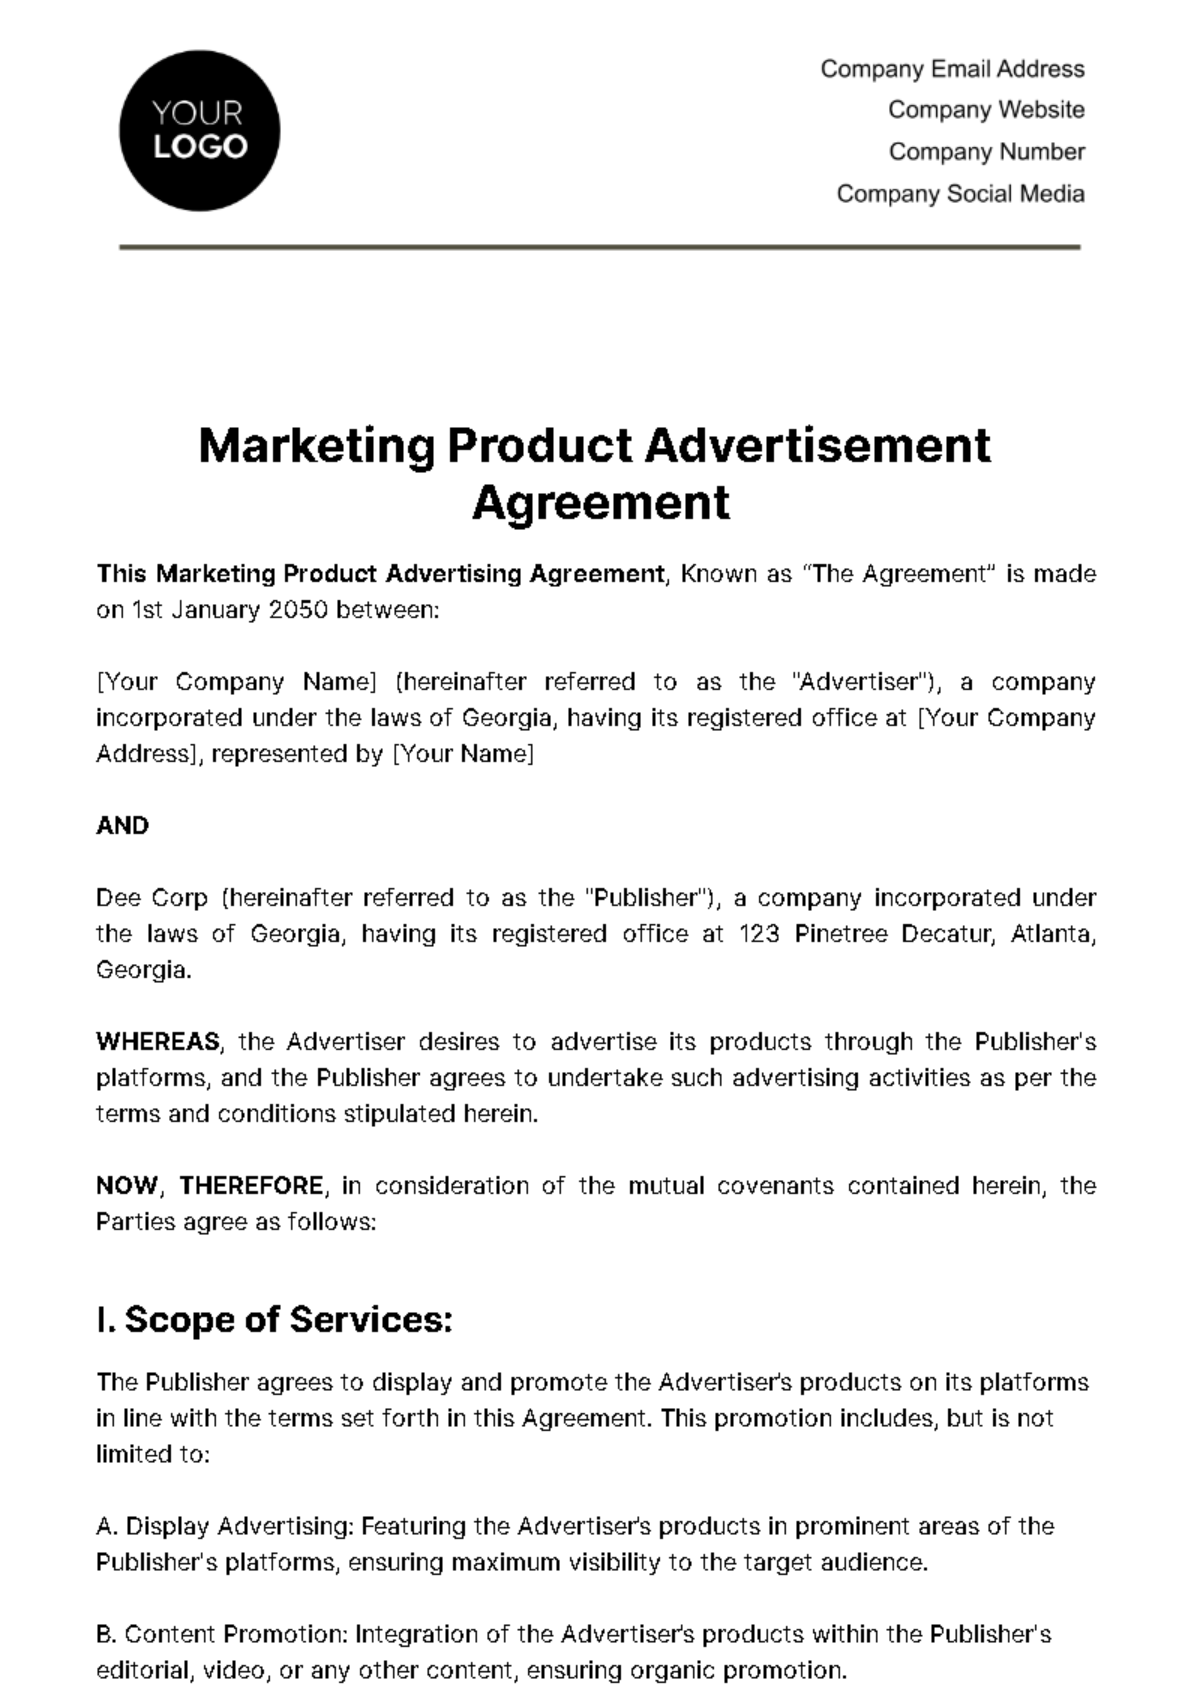 Free Marketing Product Advertisement Agreement Template